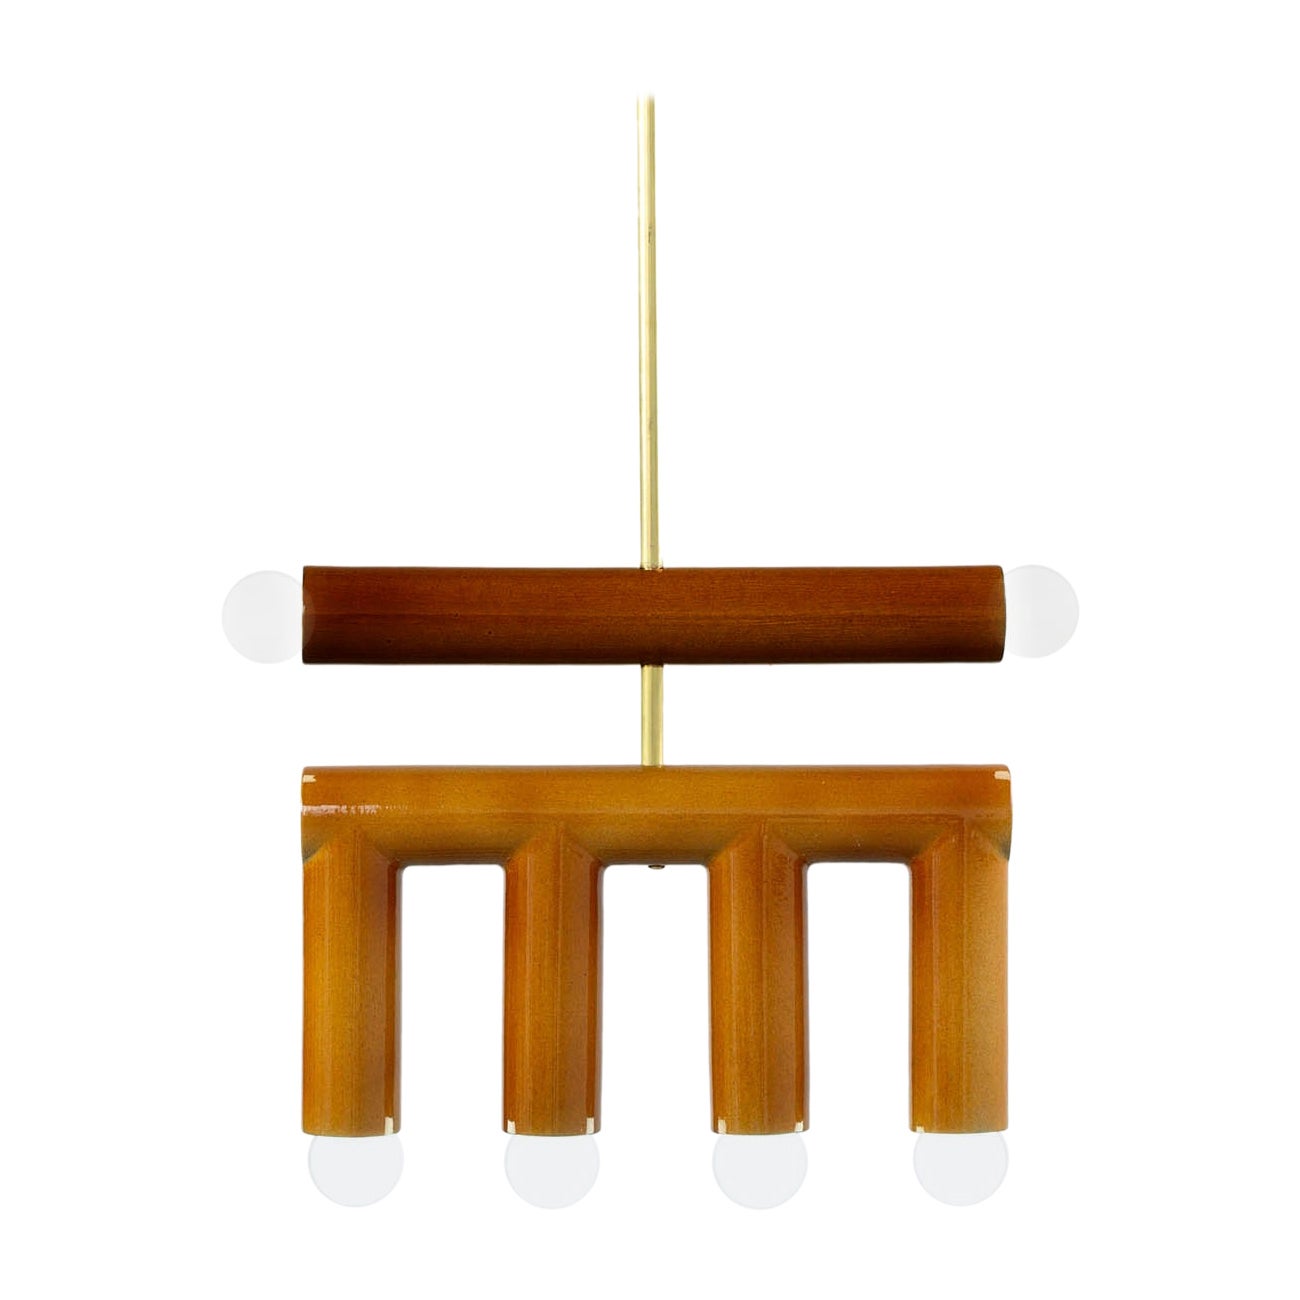 TRN D2 Pendant lamp / ceiling lamp / chandelier 
Designer: Pani Jurek

Model shown: TRN D2, Red, Ochre, Brass rod
Dimensions: H. 28 x 35 x 5 cm

Bulb (not included): E27/E26, compatible with US electric system

Materials: Hand glazed ceramic and